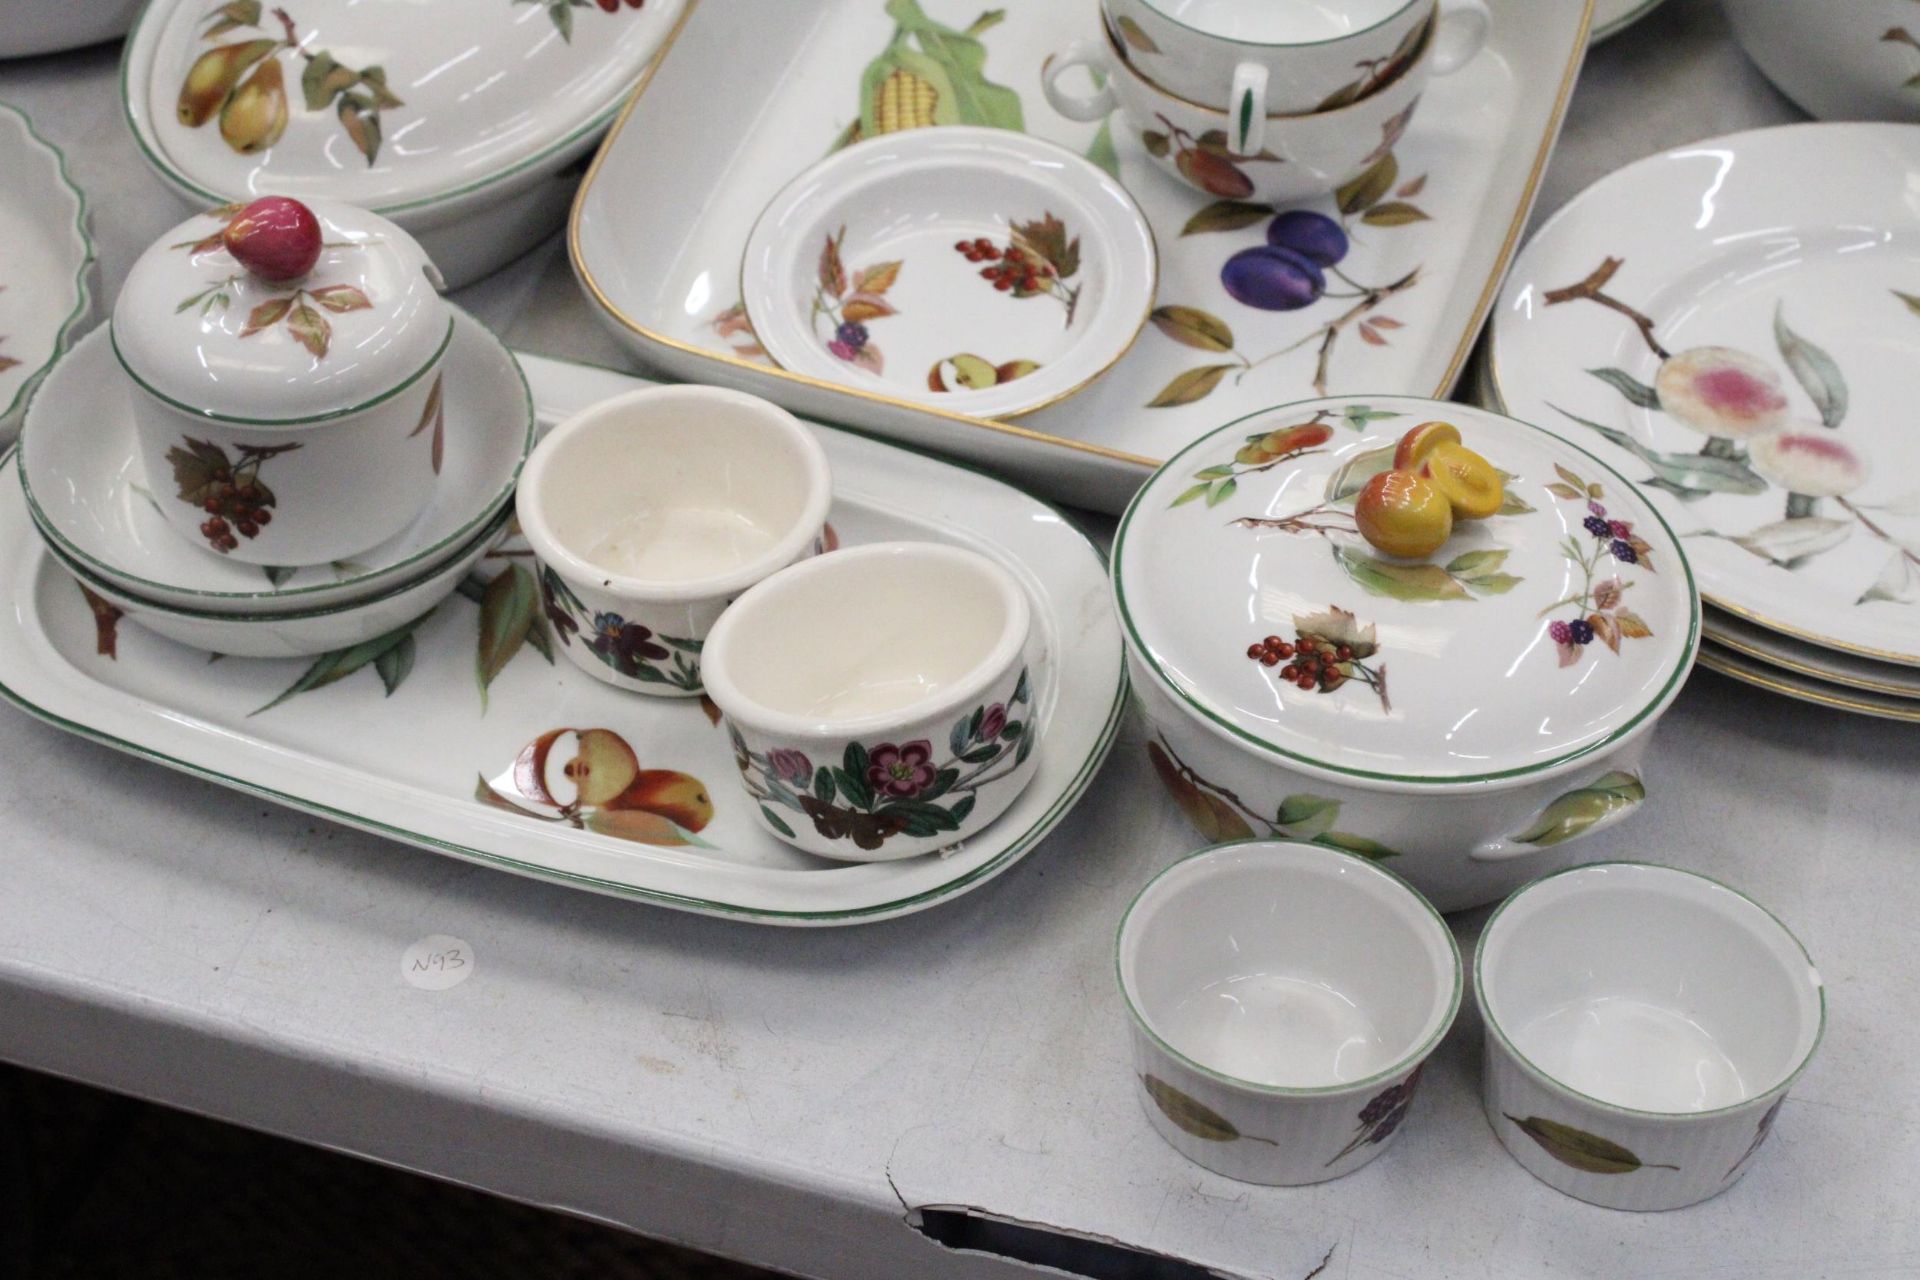 A QUANTITY OF ROYAL WORCESTER WARE TO INCLUDE PLATES, DISHES, PRESERVES JAR ETC - Image 3 of 7